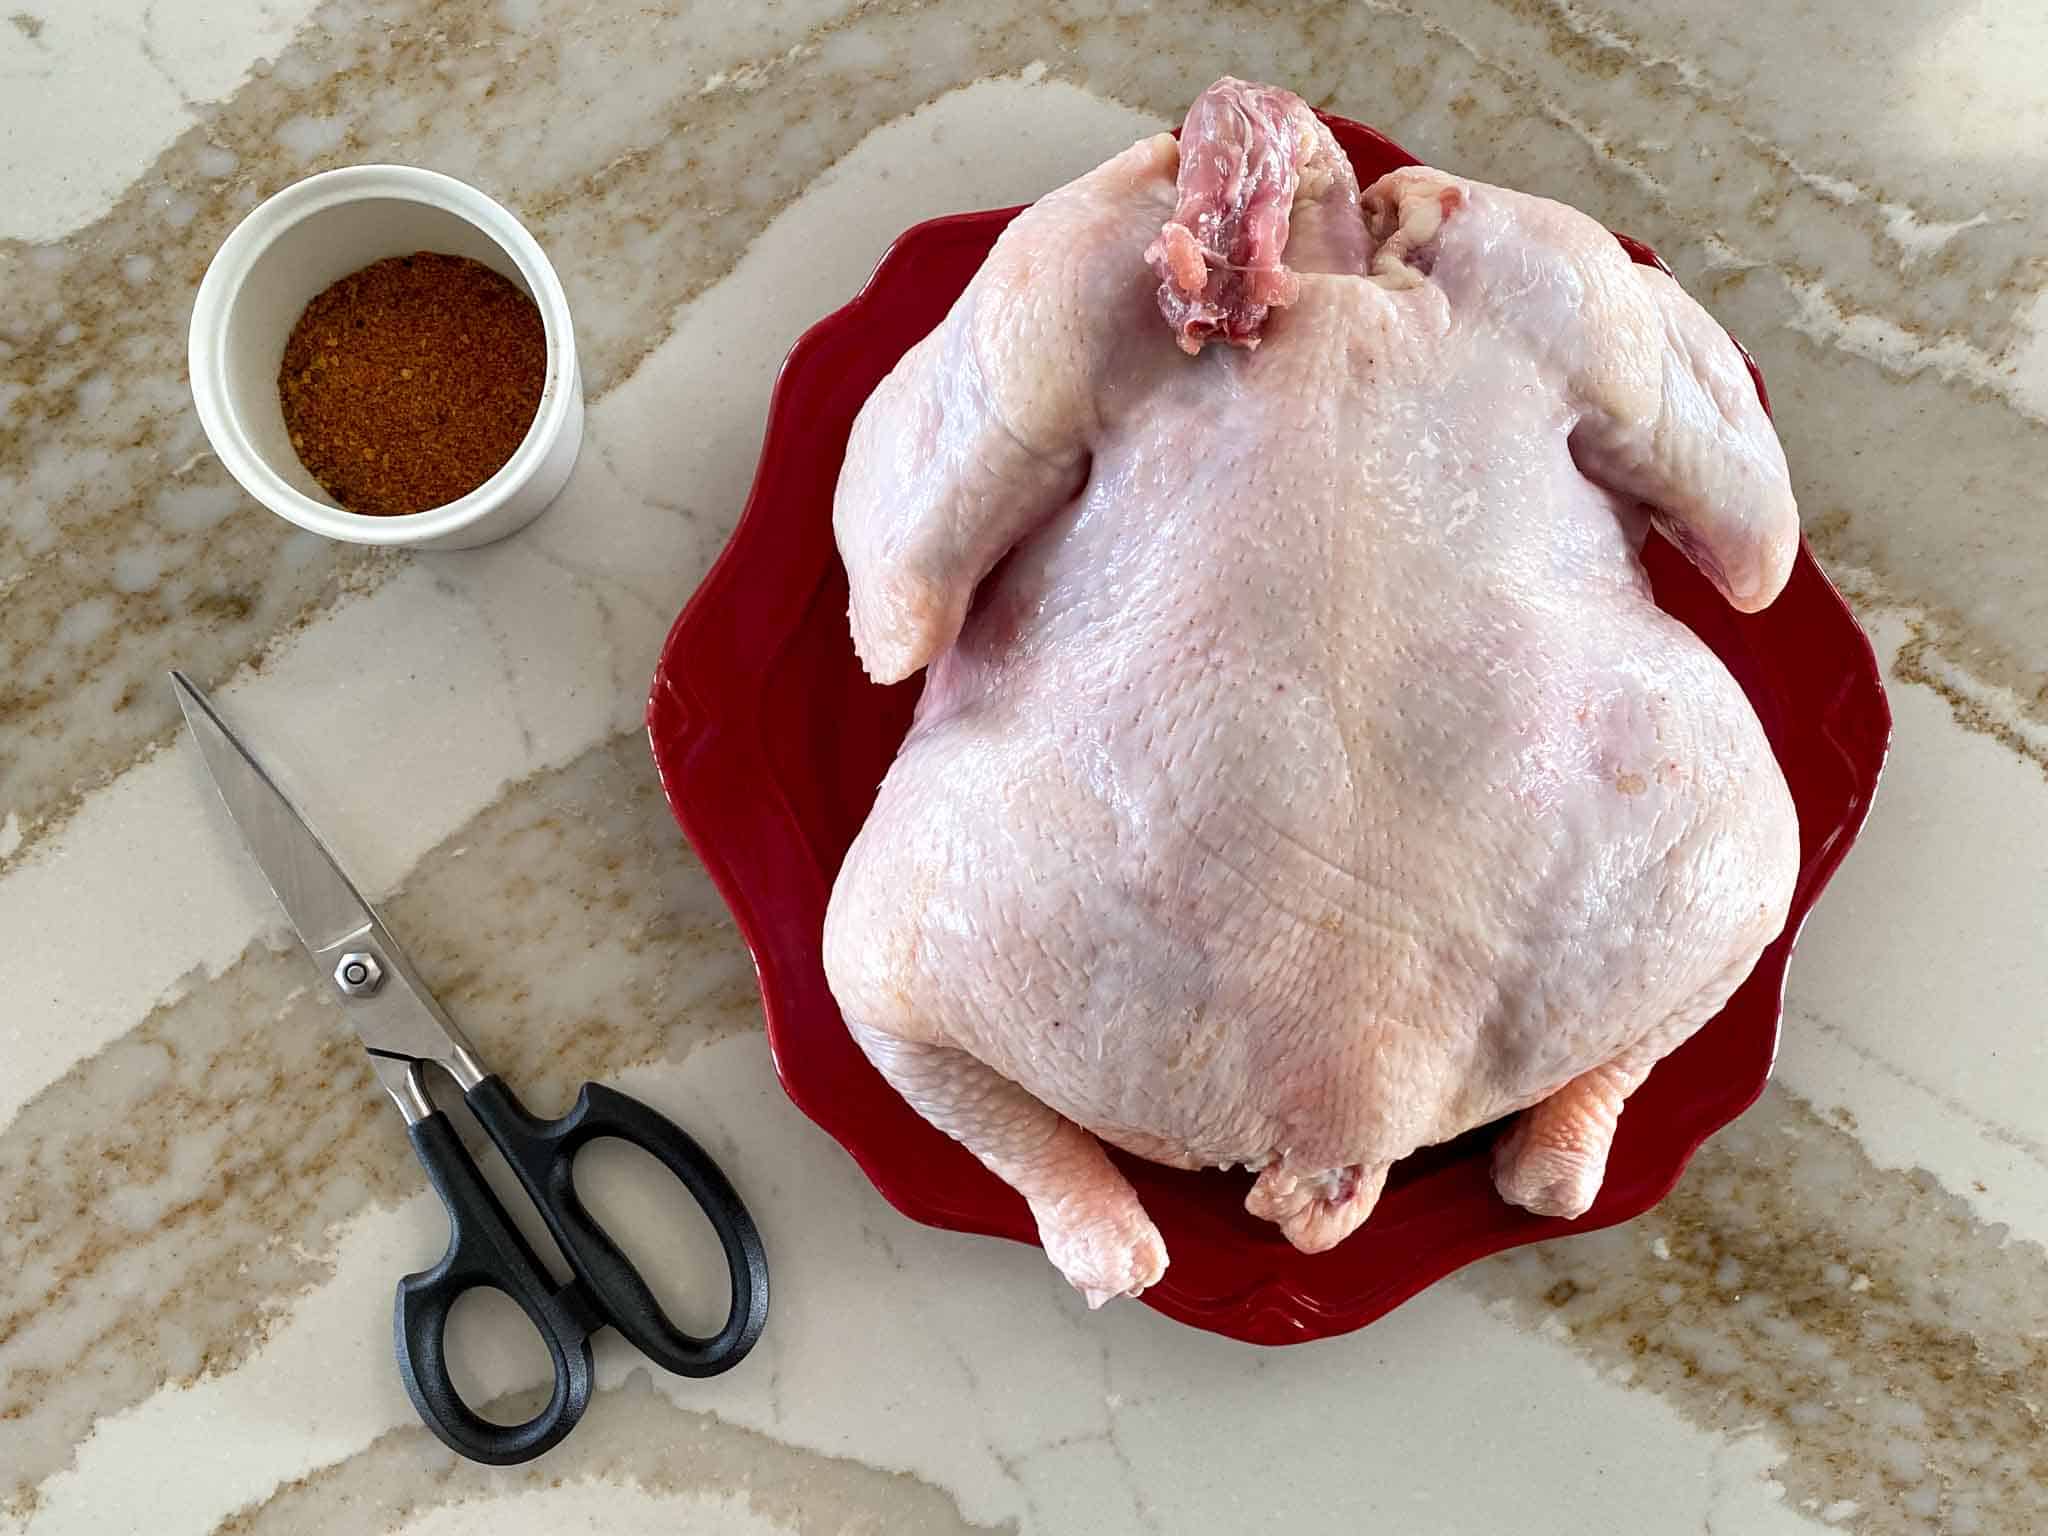 Raw roasting chicken with kitchen shears and poultry rub in a small bowl.